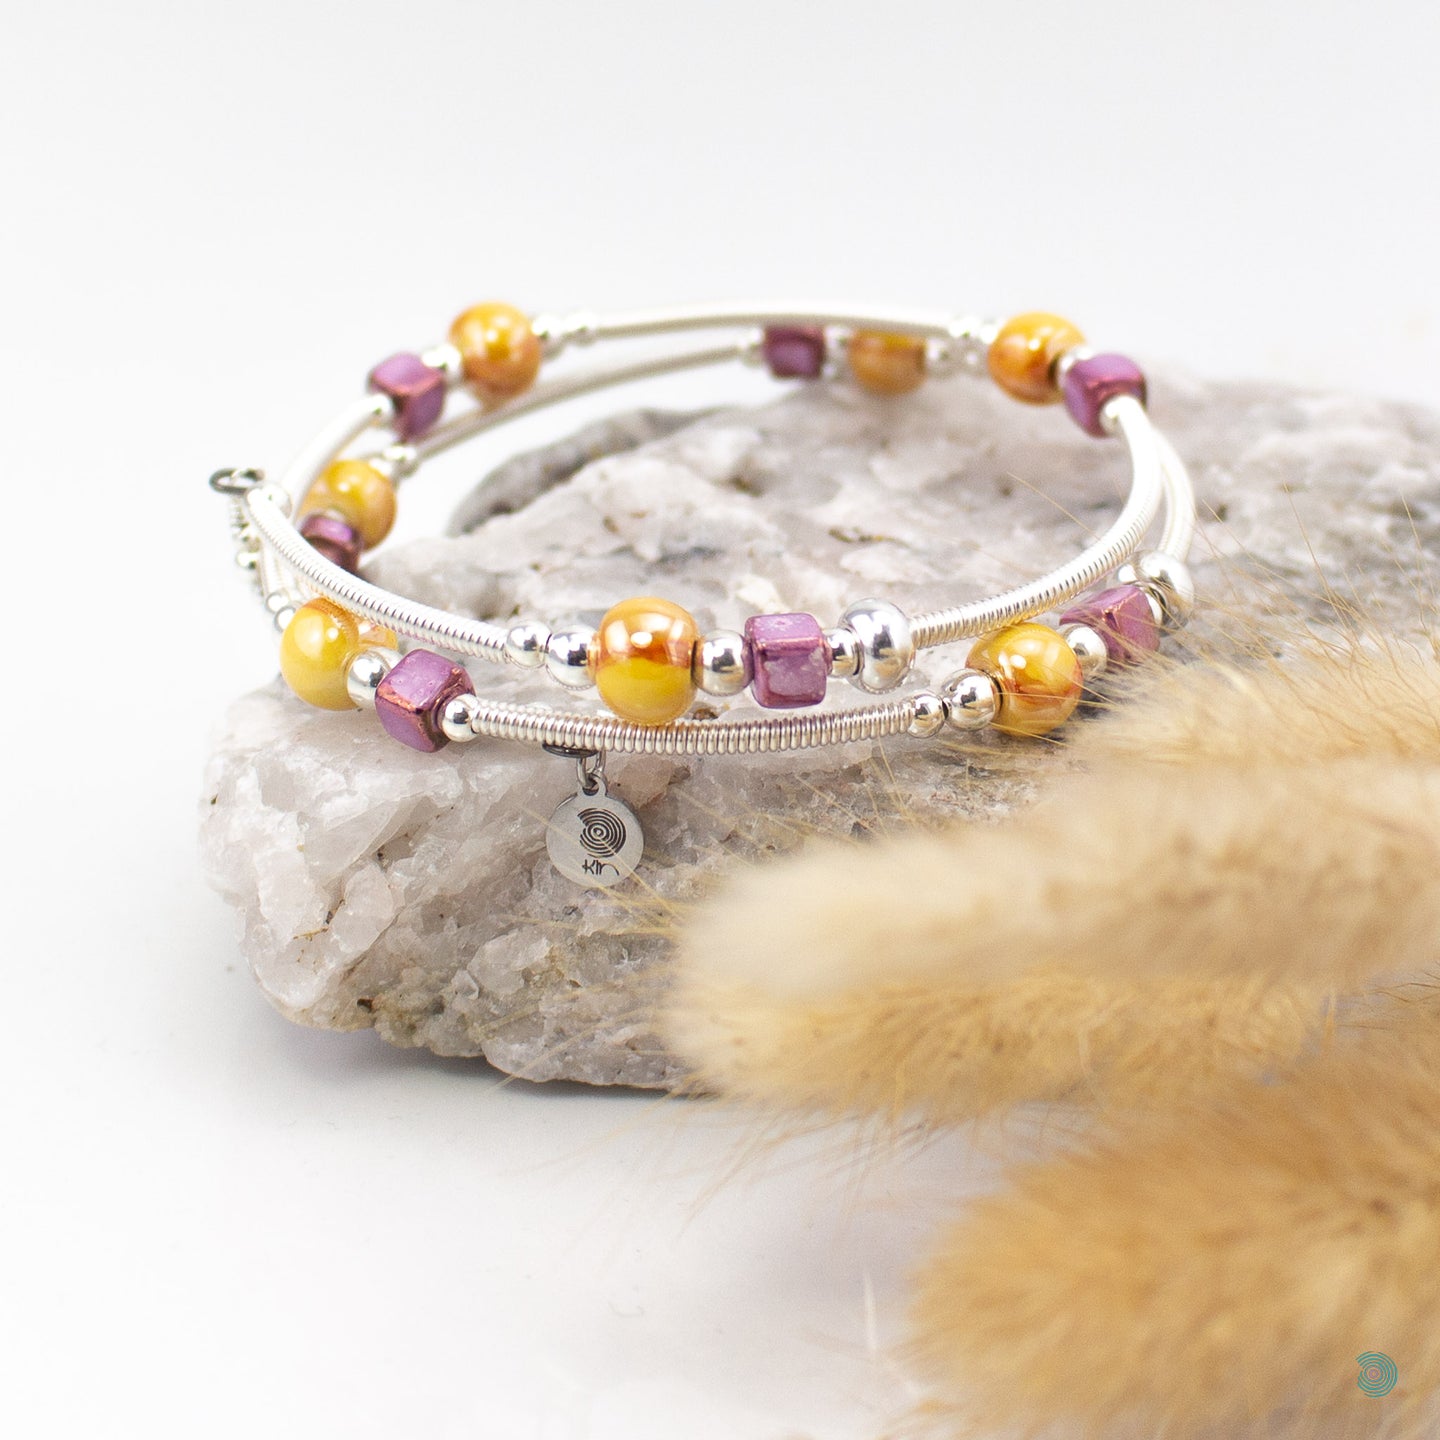 Easy to wear bracelet that simply wraps around the wrist and sits in place. No clasp needed. Hand wrapped silver filled tubes, with ceramic cubes in a mustard and purple colour mix with small sterling silver beads on each side and 